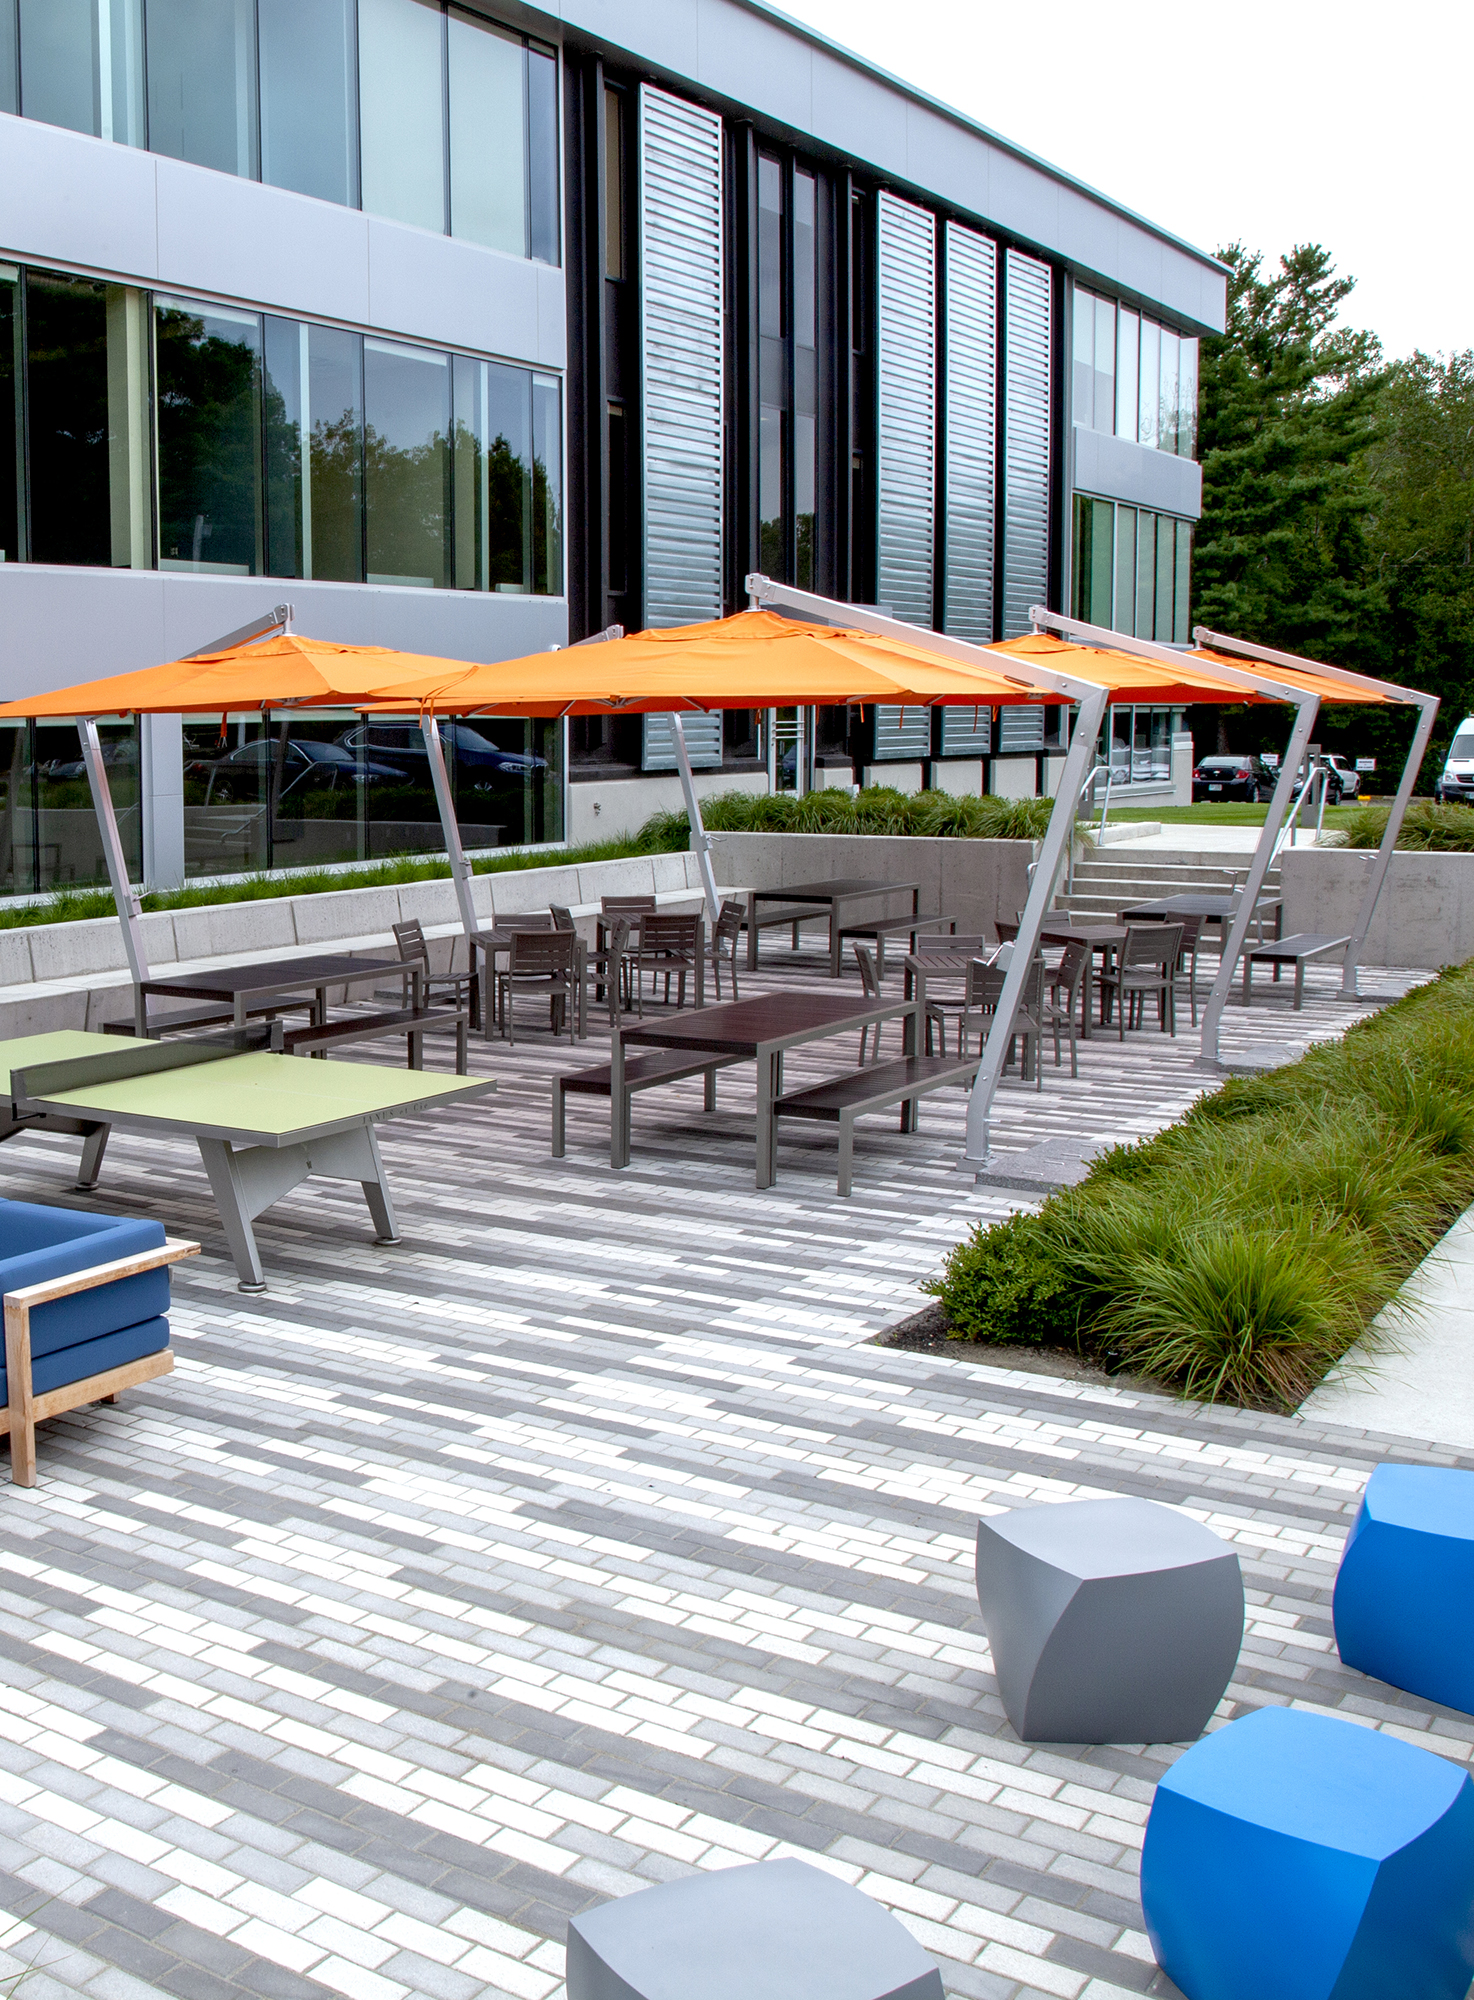 An outdoor amenity area features a 3 color linear pattern made from Unilock pavers, outdoor furniture, and large orange umbrellas.